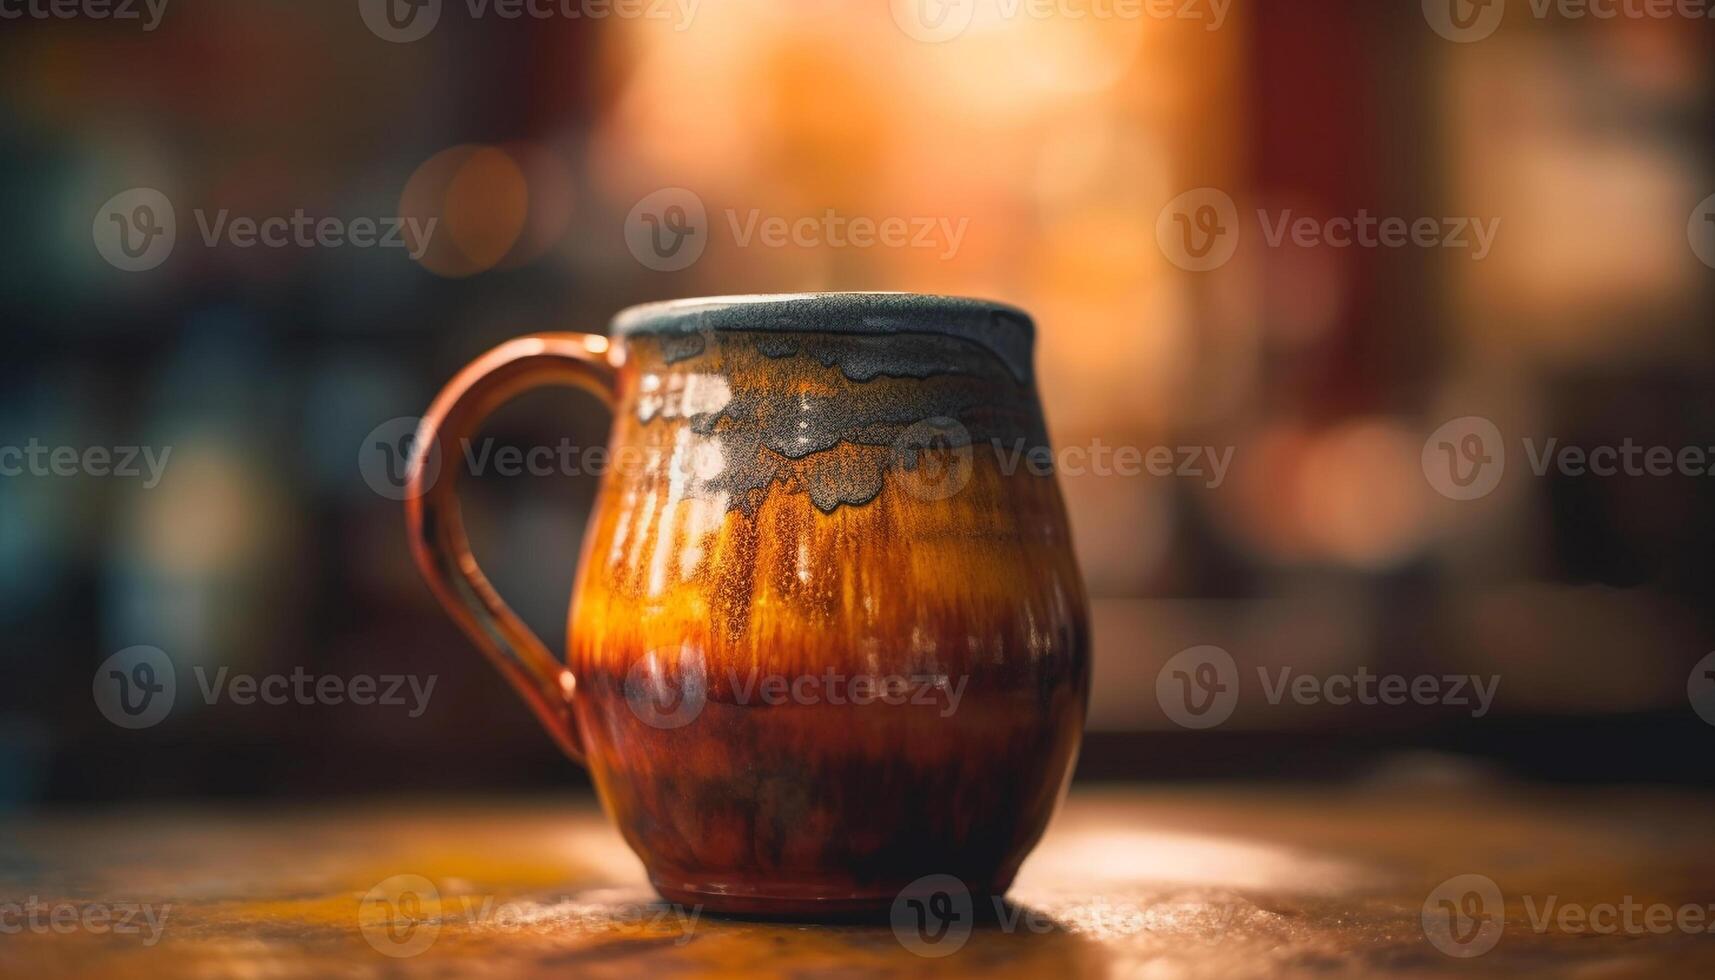 Rustic earthenware mug with handle on wooden table in pub generated by AI photo